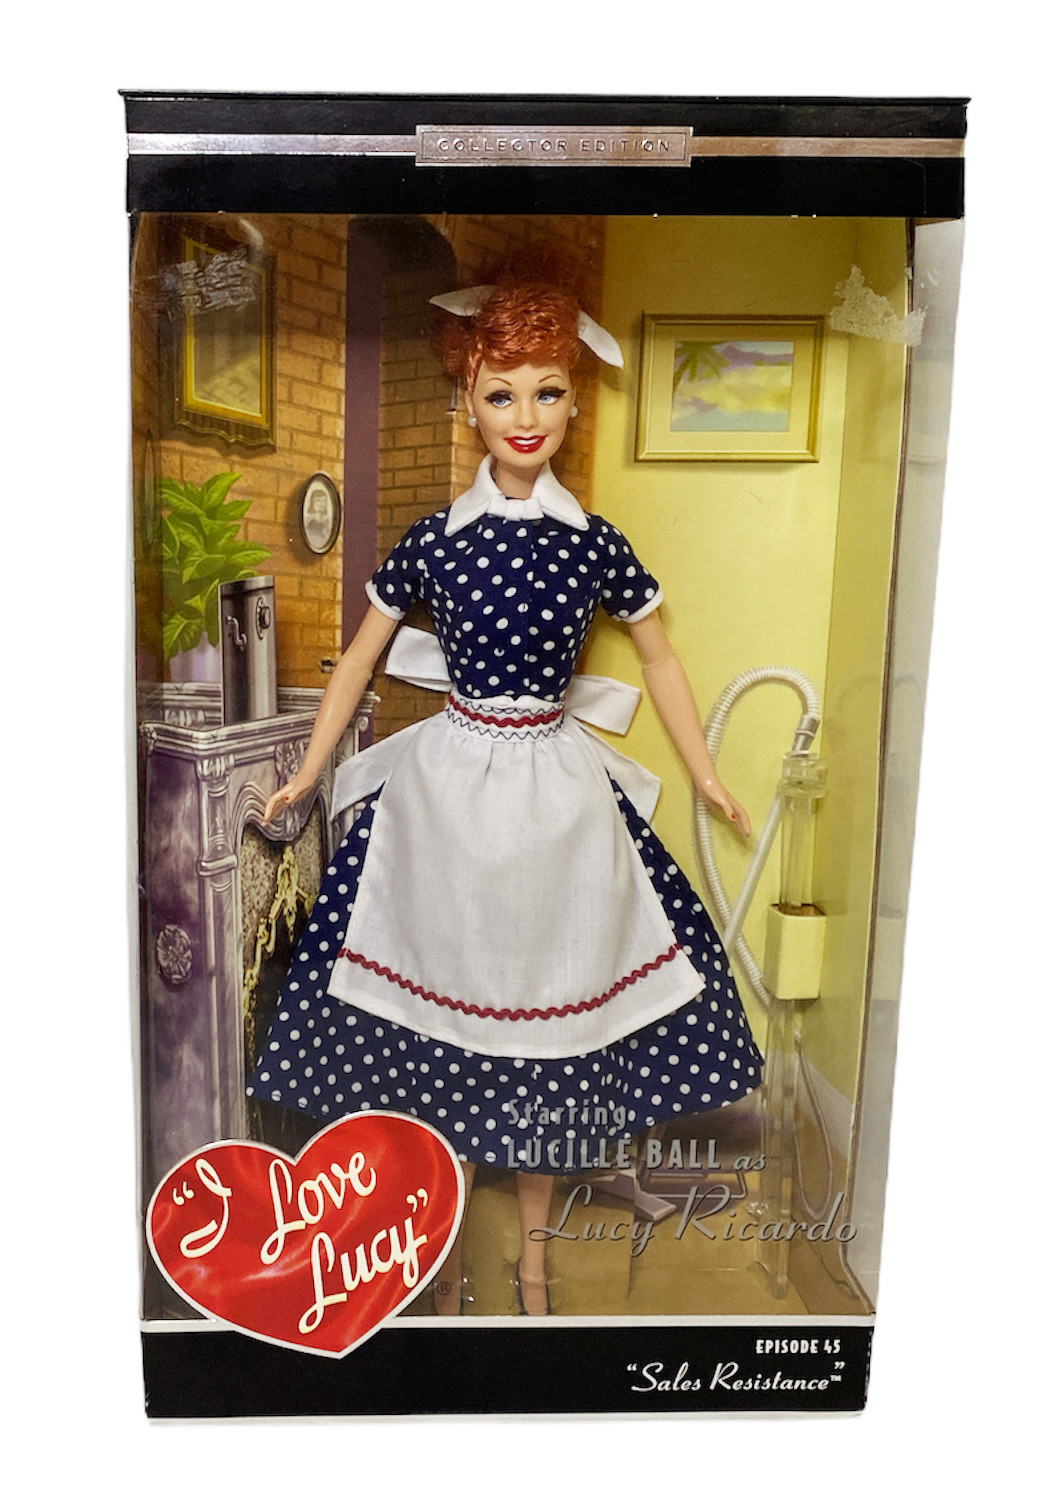 I Love Lucy Doll Episode 45 Sales Resistance Collector Edition #b3451 Nrfb 2004